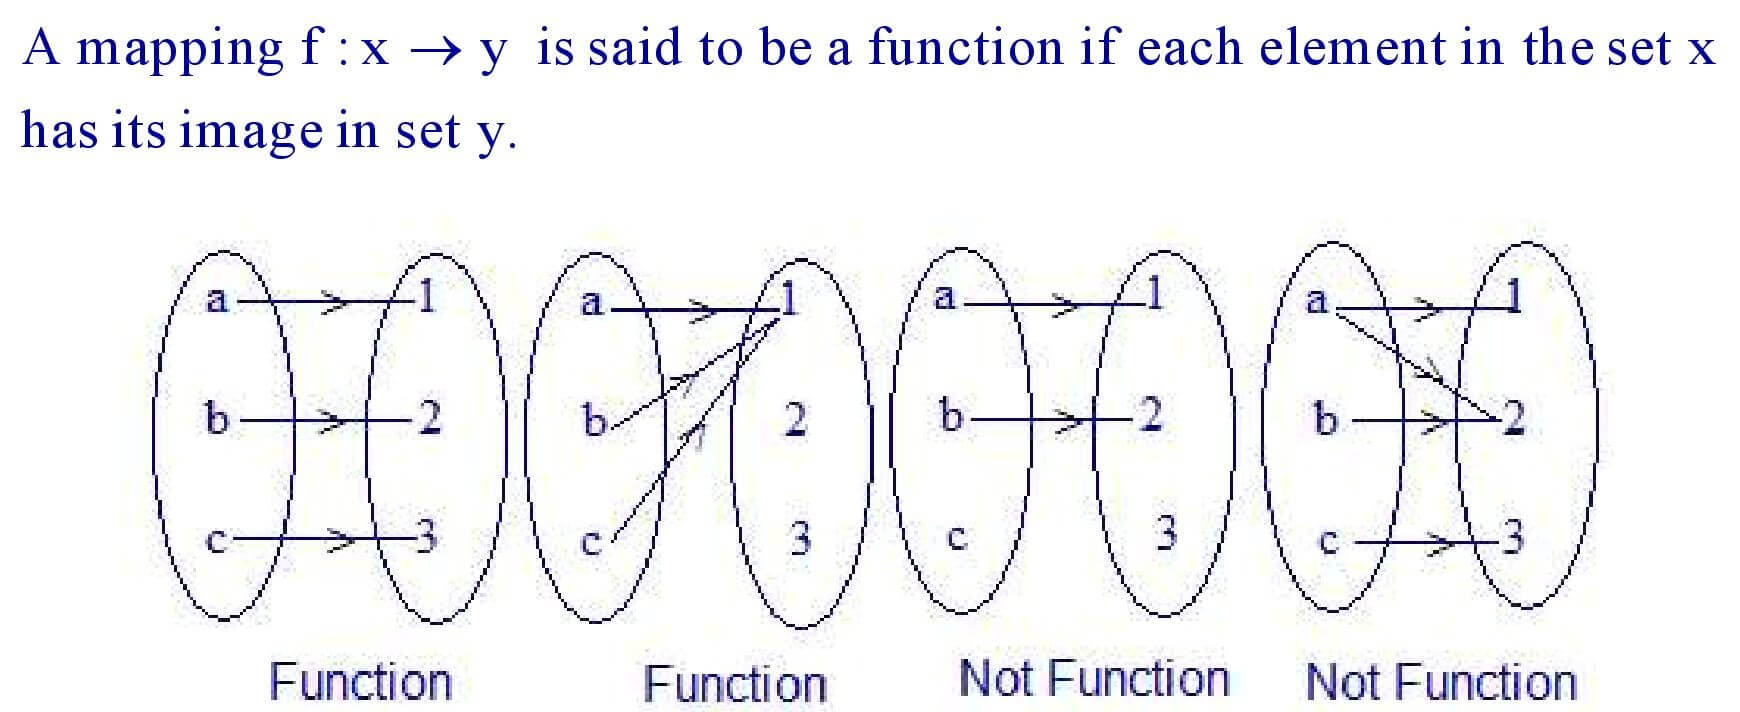 Definition of function